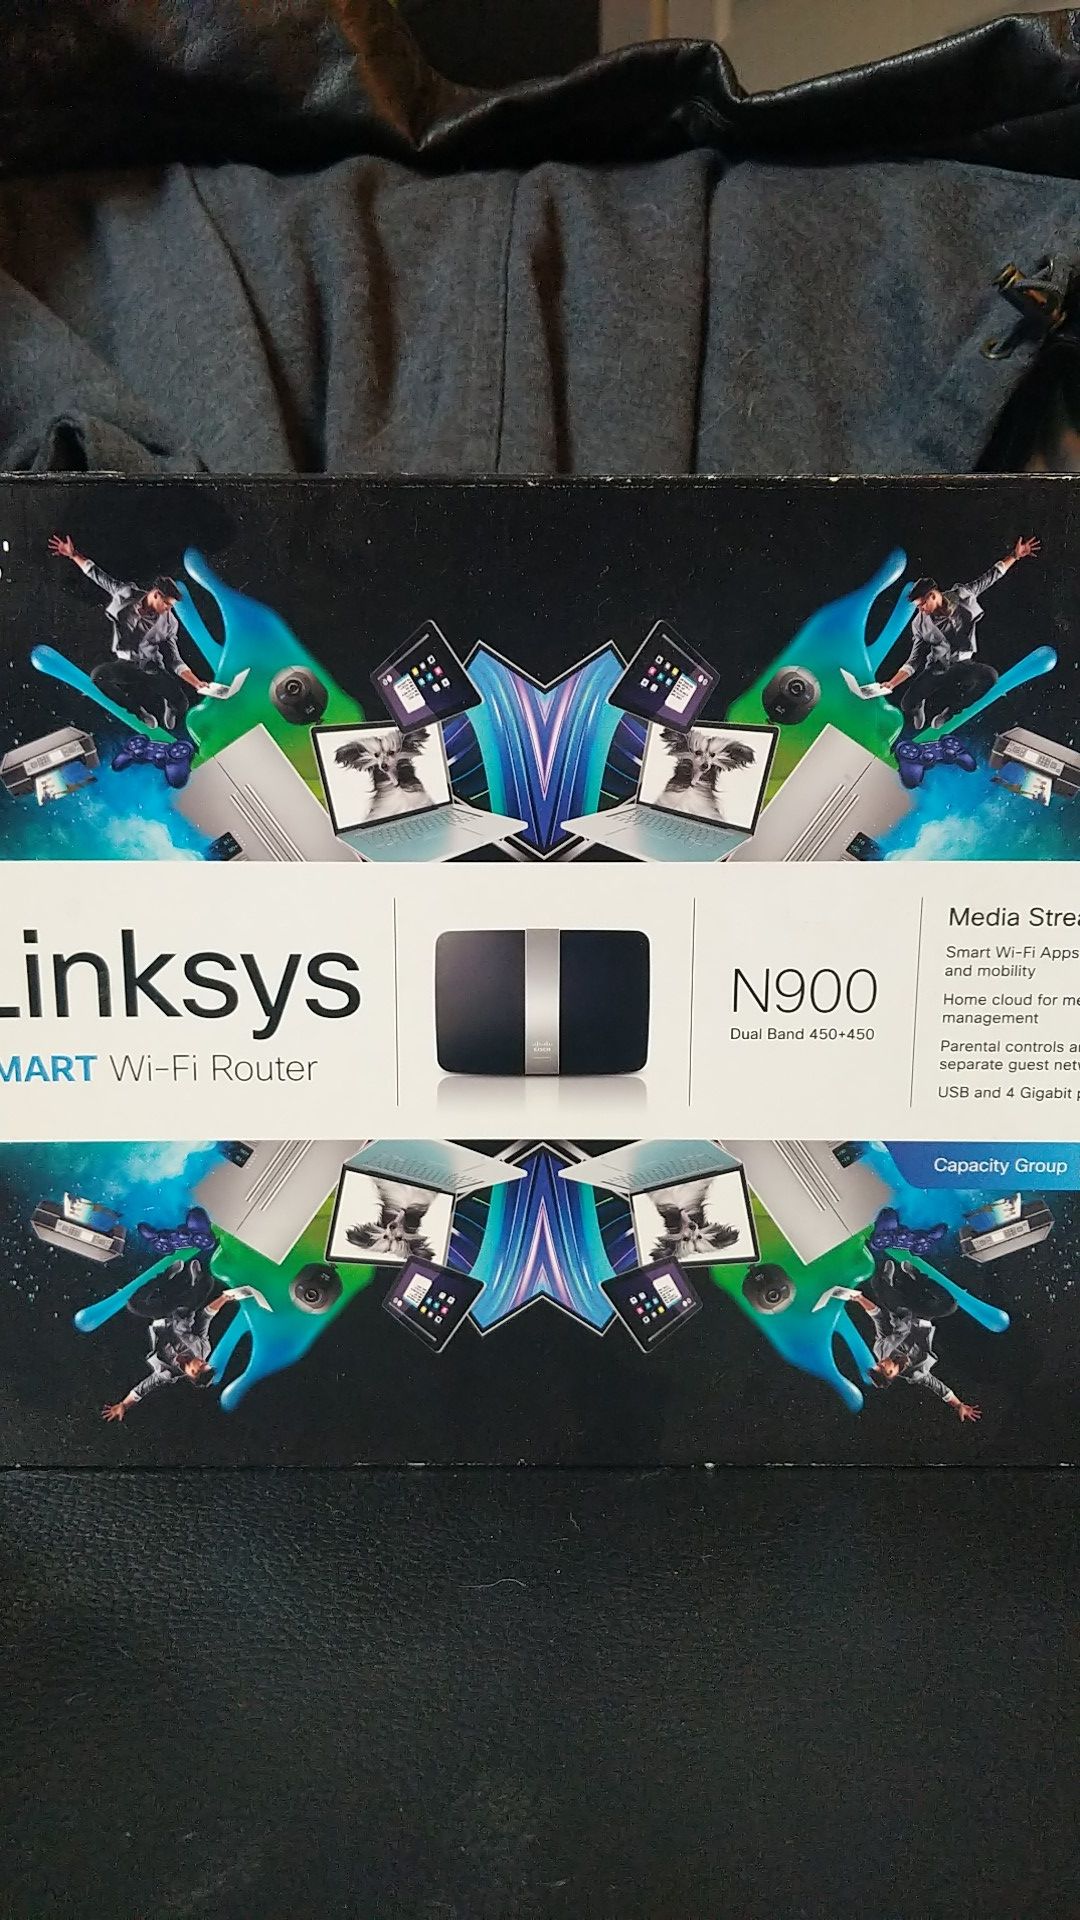 Linksys smart Wi-Fi N900 Router